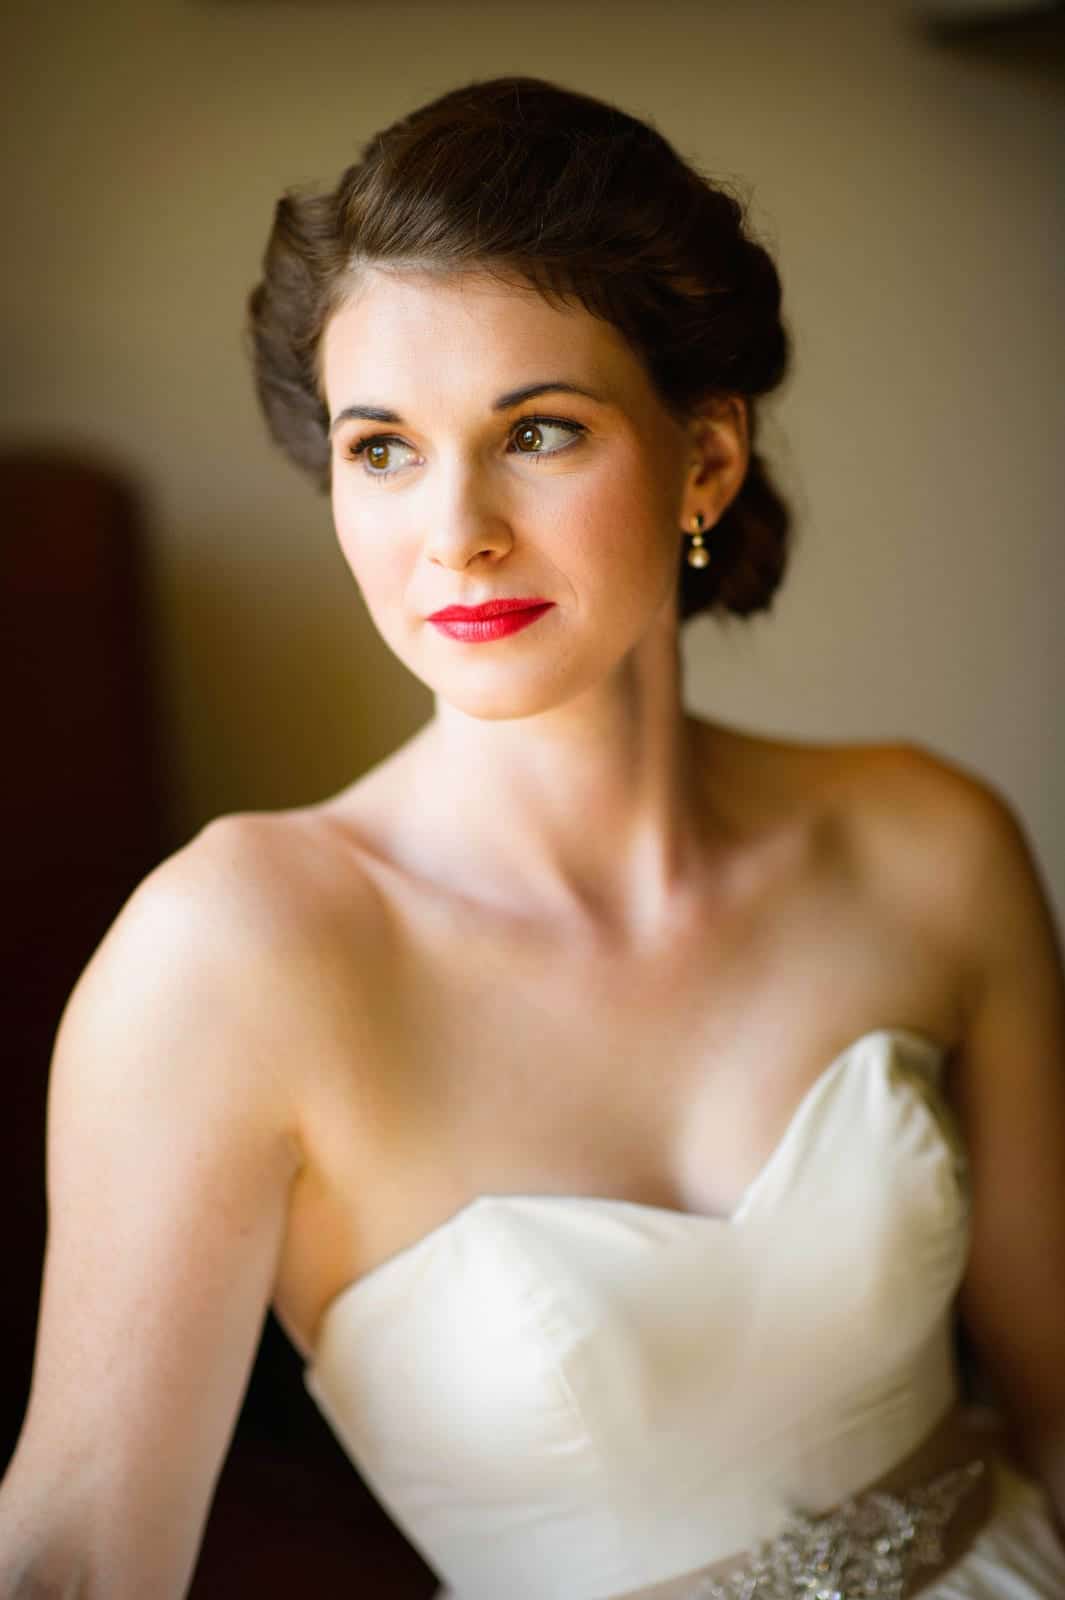 A beautiful young brunette bride with a strapless dress looks off to the left of the frame.